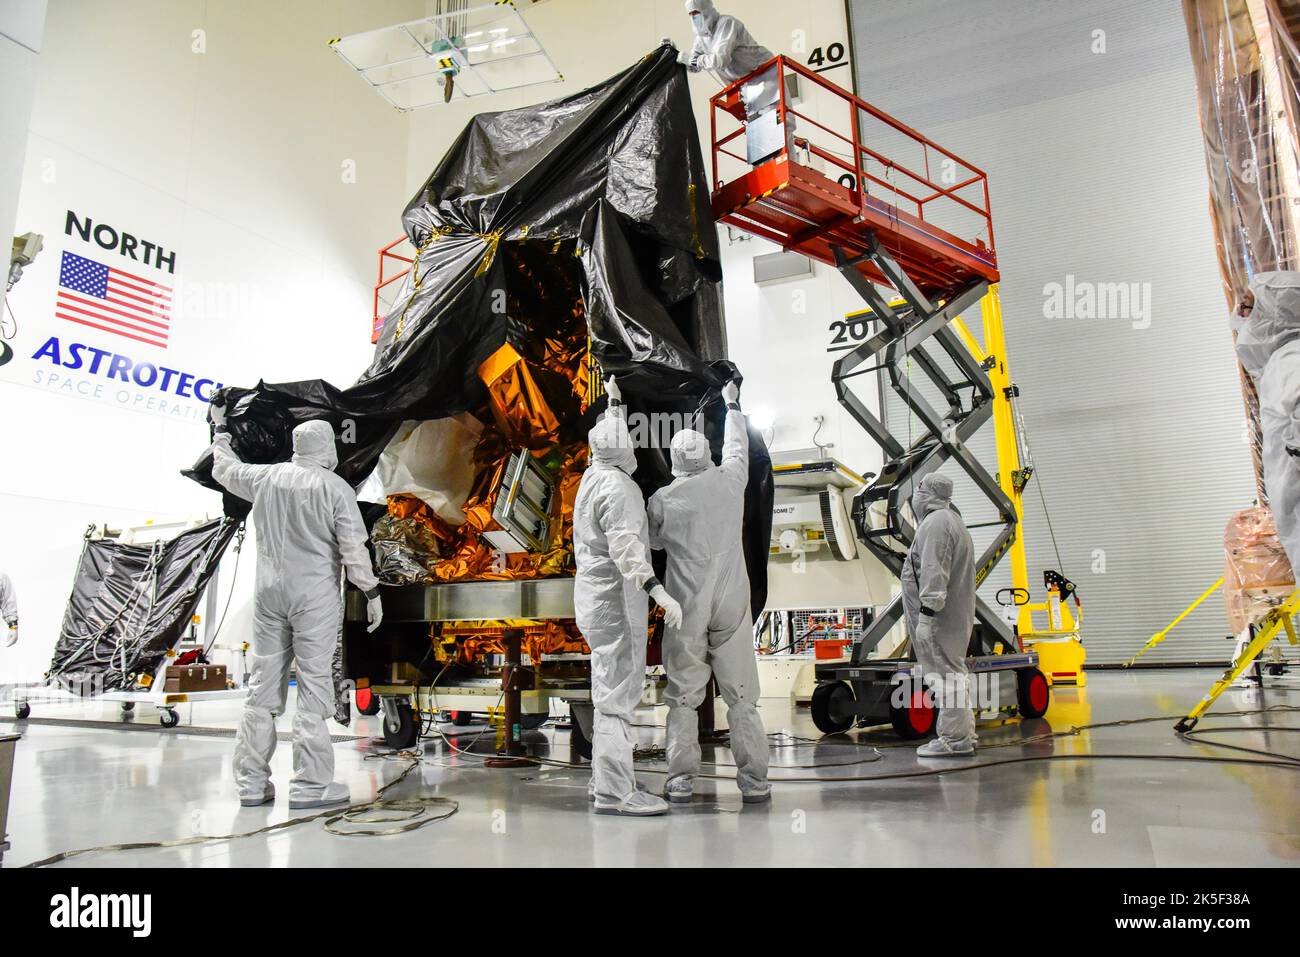 Technicians remove the protective covering from NASA and the National Oceanic and Atmospheric Administration’s (NOAA) Joint Polar Satellite System-2 (JPSS-2) satellite inside the Astrotech Space Operations facility at Vandenberg Space Force Base in California on Aug. 22, 2022. JPSS-2 is the third satellite in the Joint Polar Satellite System series. It is scheduled to lift off from VSFB on Nov. 1 from Space Launch Complex-3. JPSS-2, which will be renamed NOAA-21 after reaching orbit, will join a constellation of JPSS satellites that orbit from the North to the South pole, circling Earth 14 tim Stock Photo